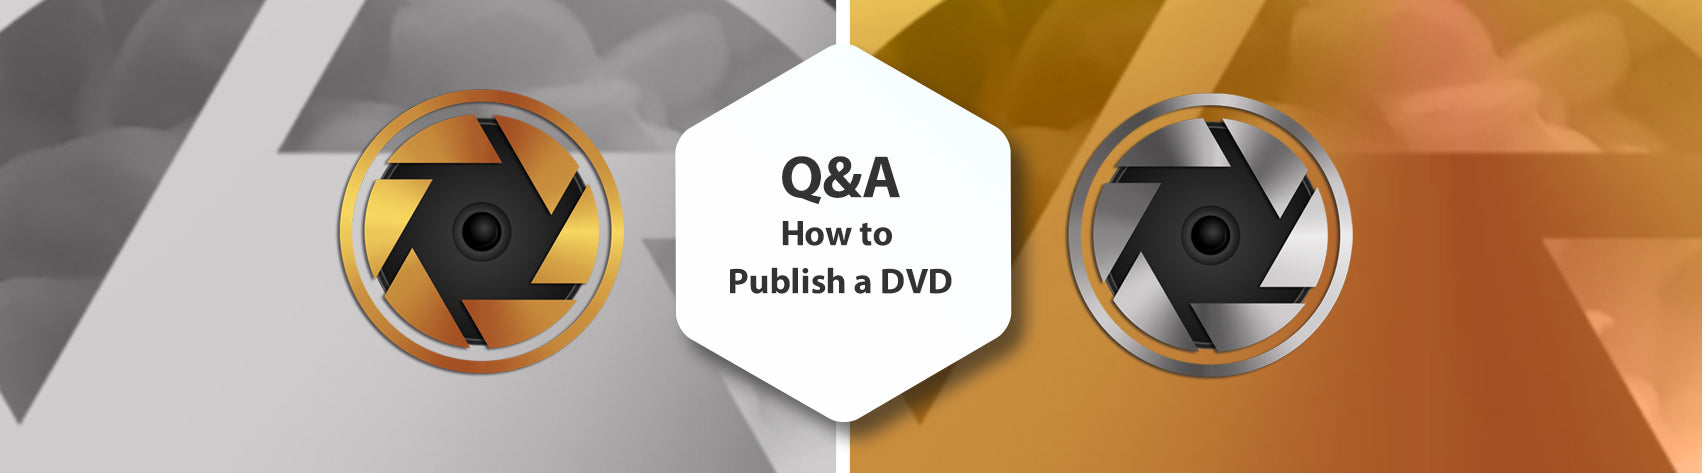 Q&A - How to Publish a DVD